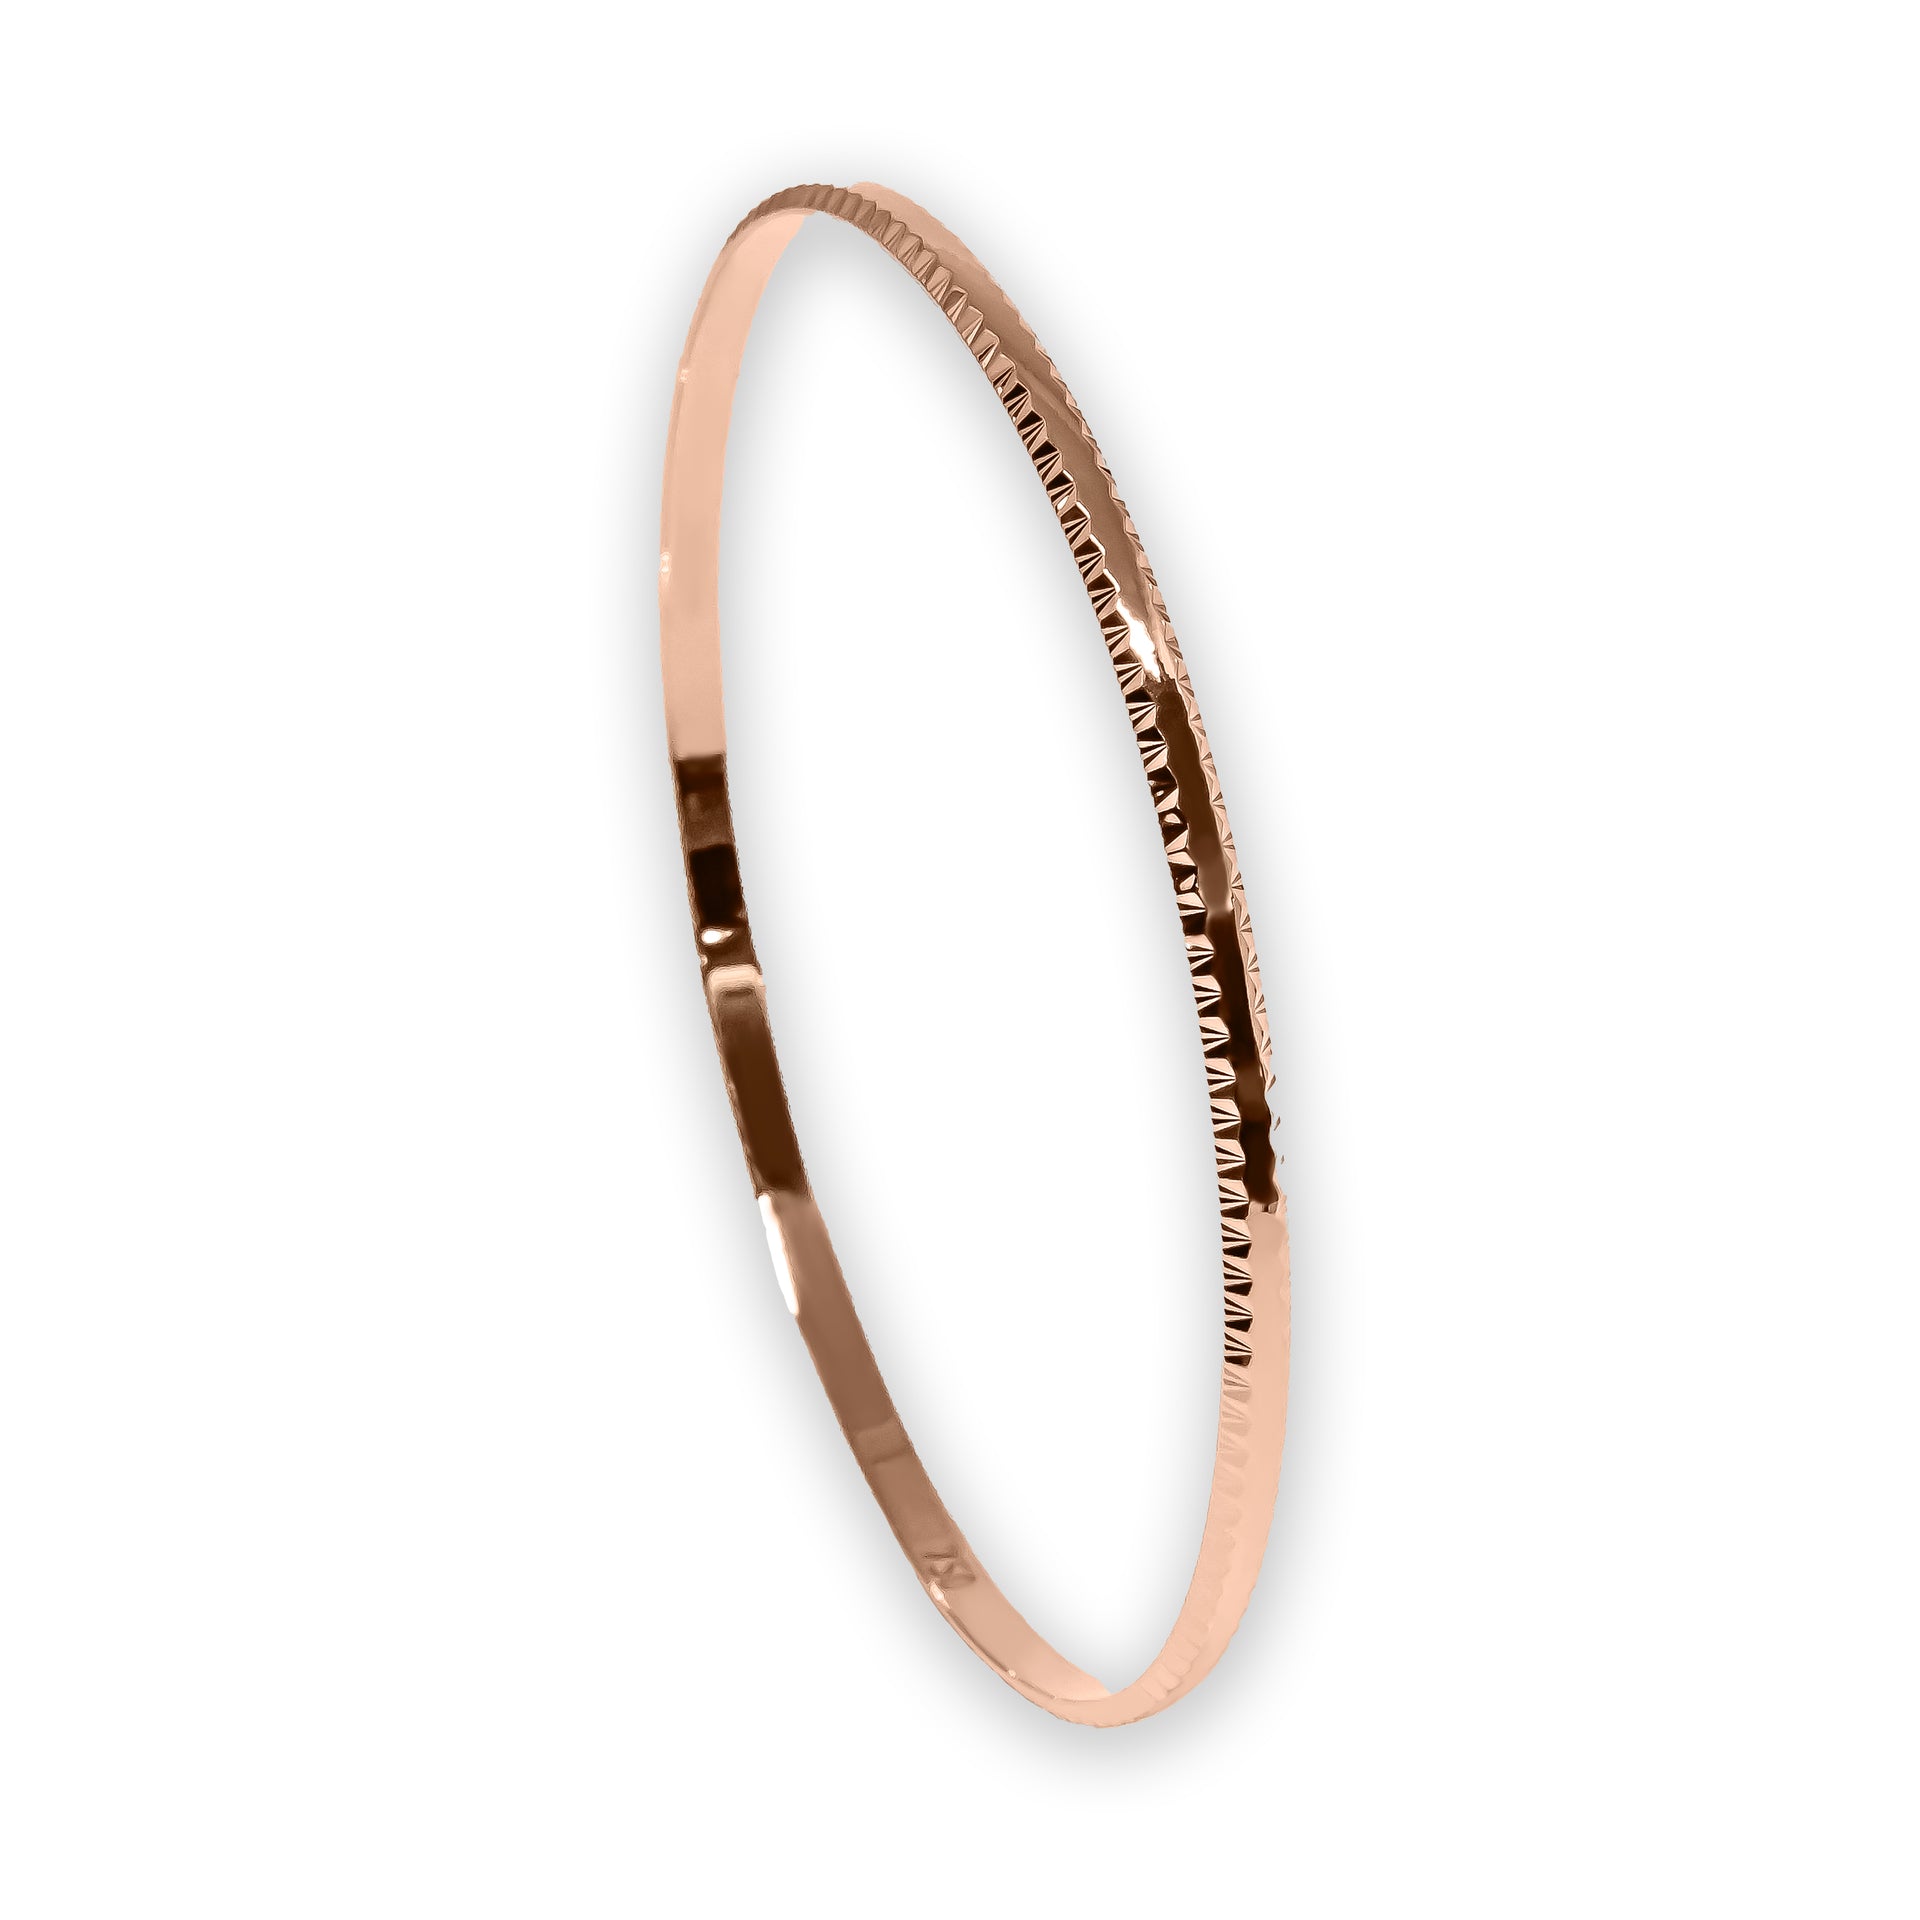 Bangle EARTH IS ROUND 3mm notch design red gold 18k 750